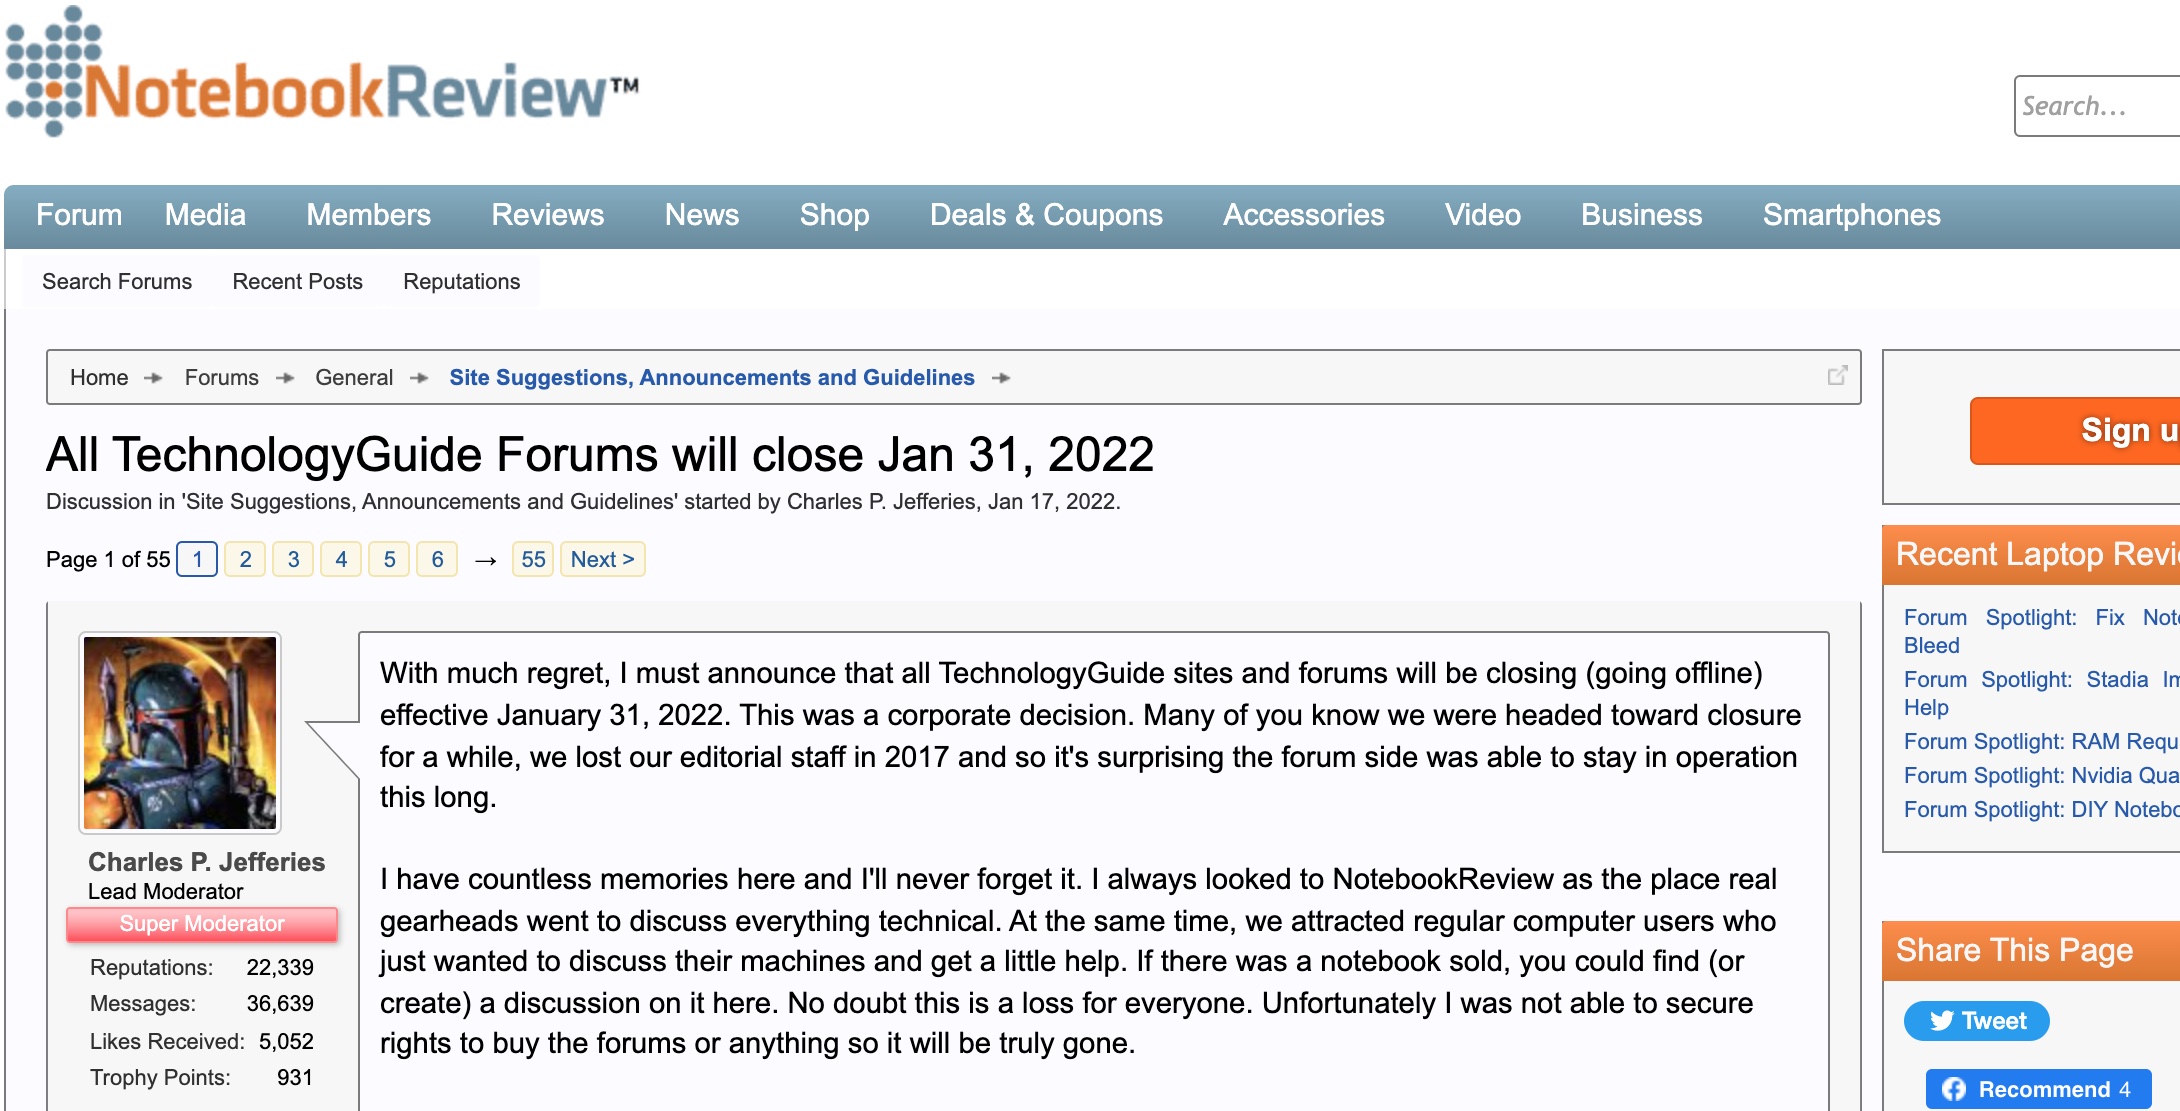 All TechnologyGuide Forums shutting down January 31